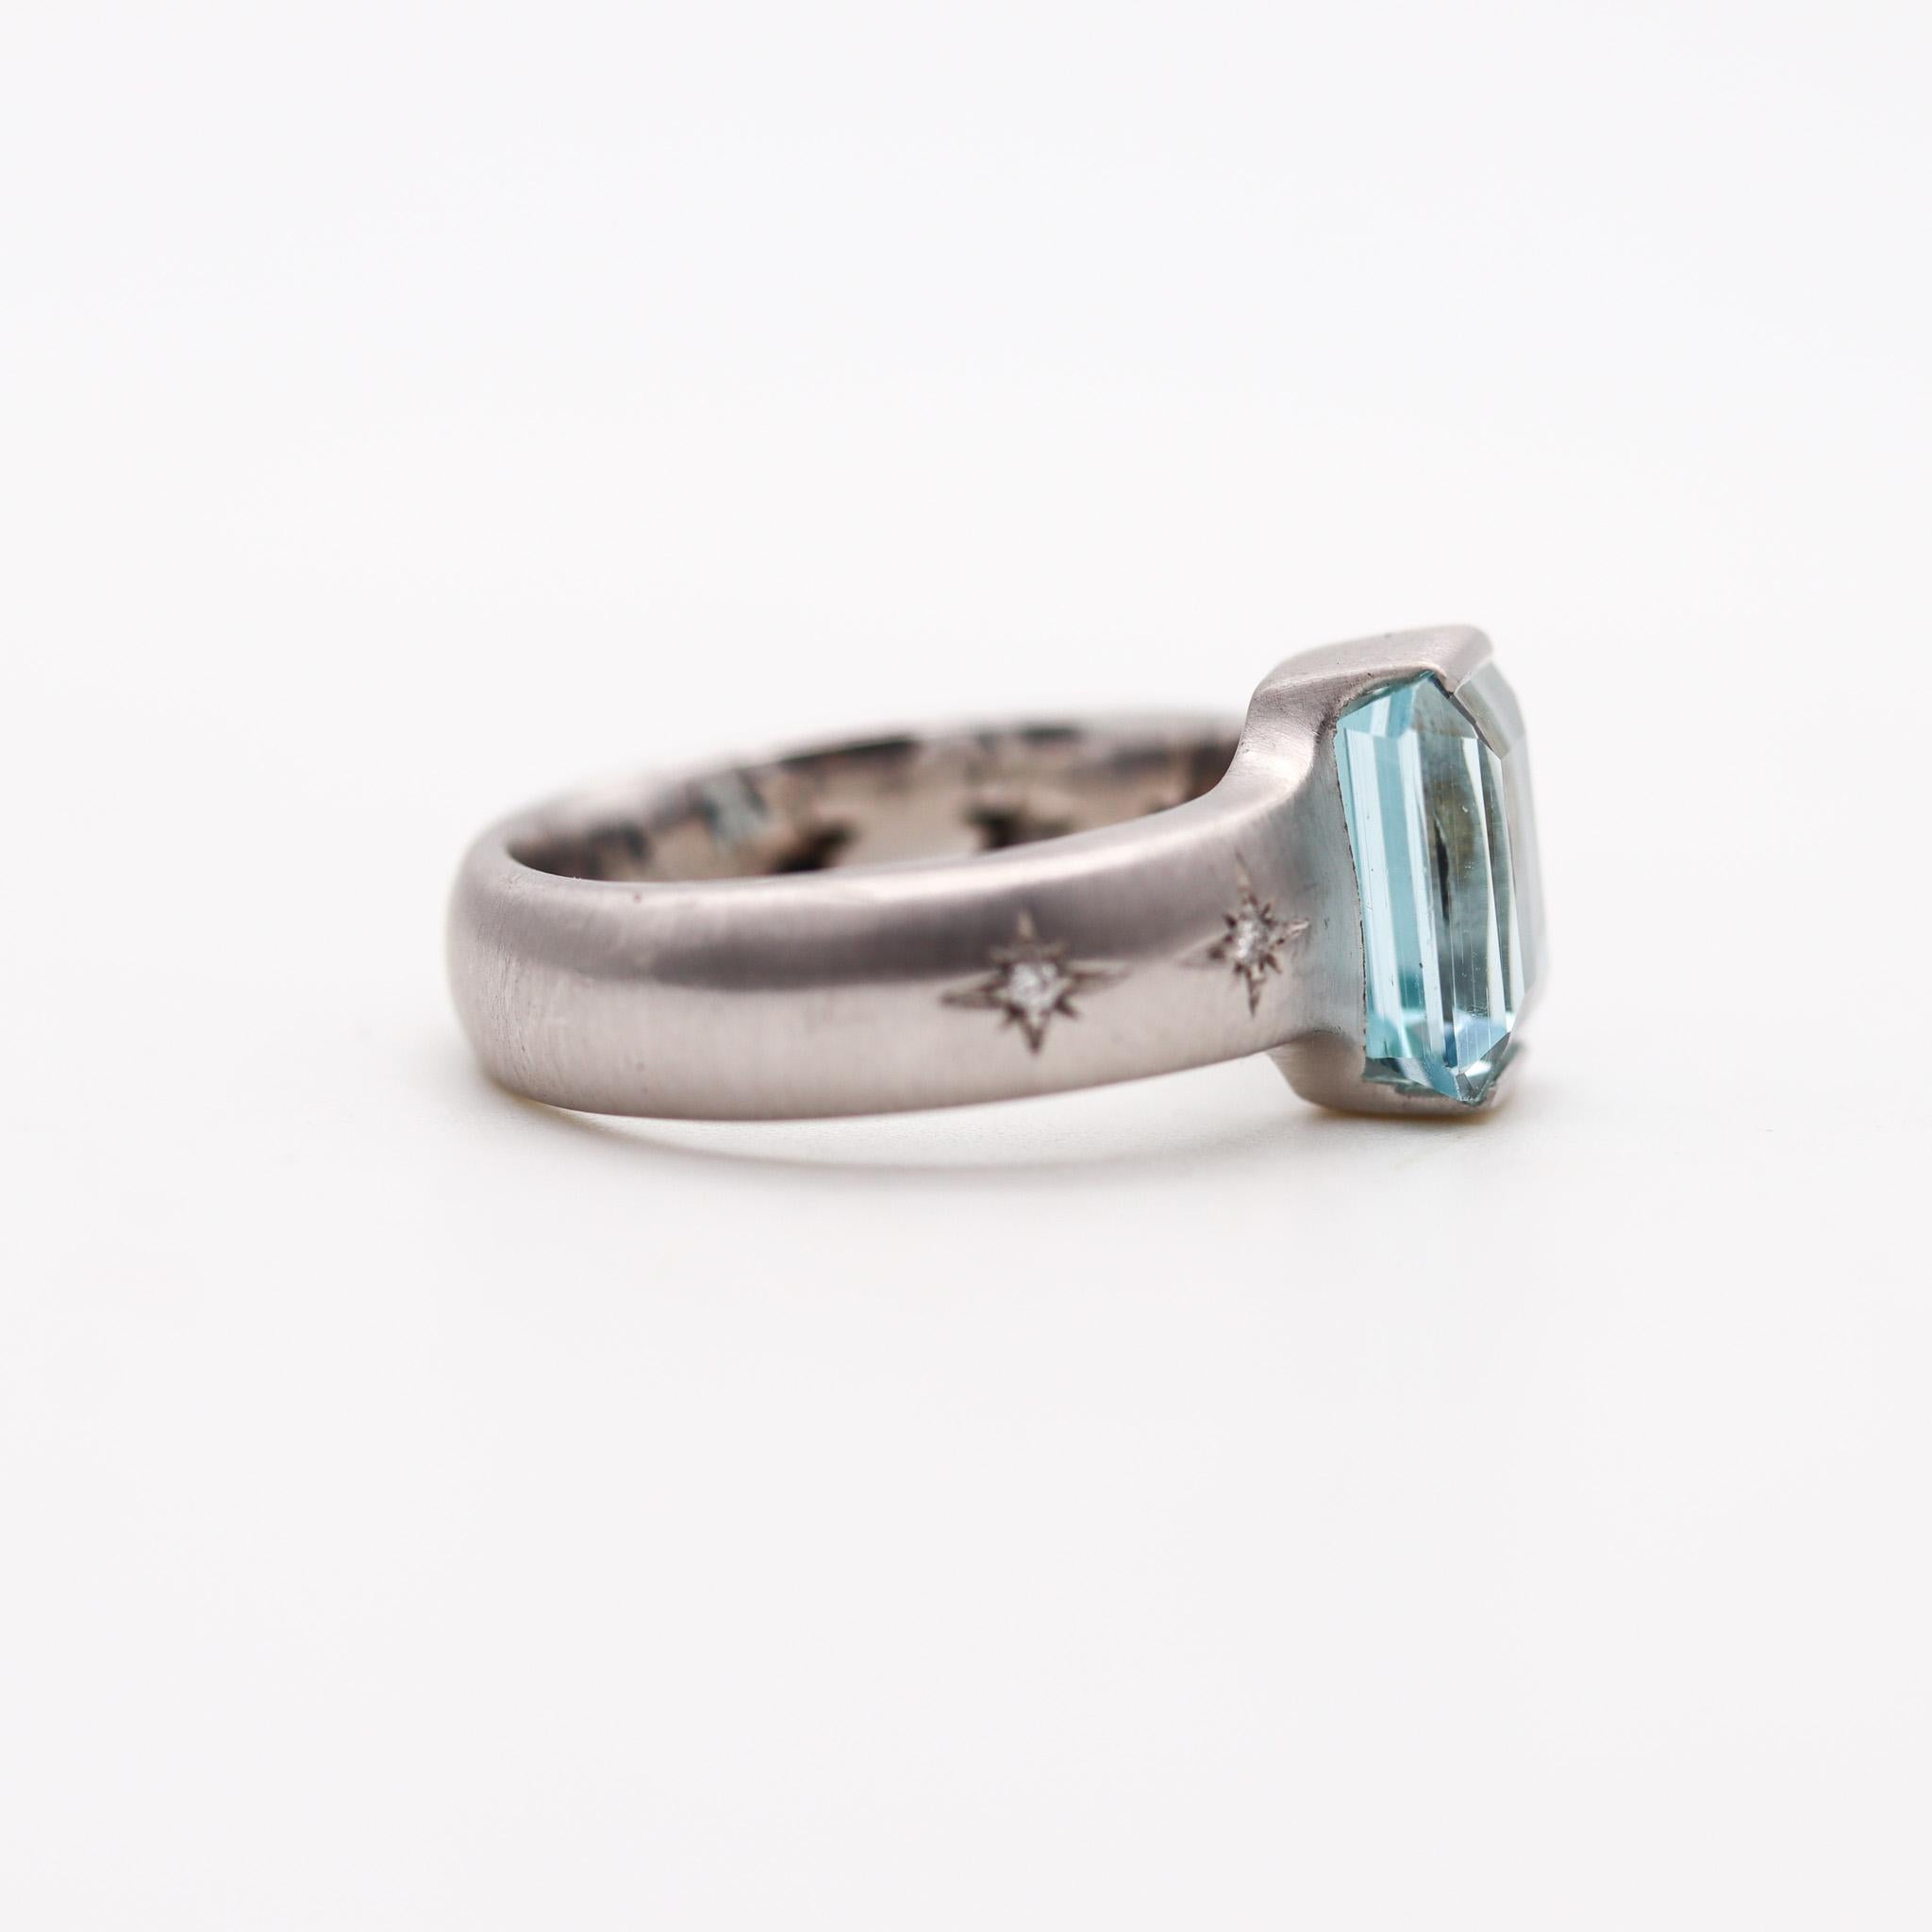 Modernist H. Stern Cocktail Ring 18Kt White Gold With 3.95 Ctw In Aquamarine And Diamonds For Sale